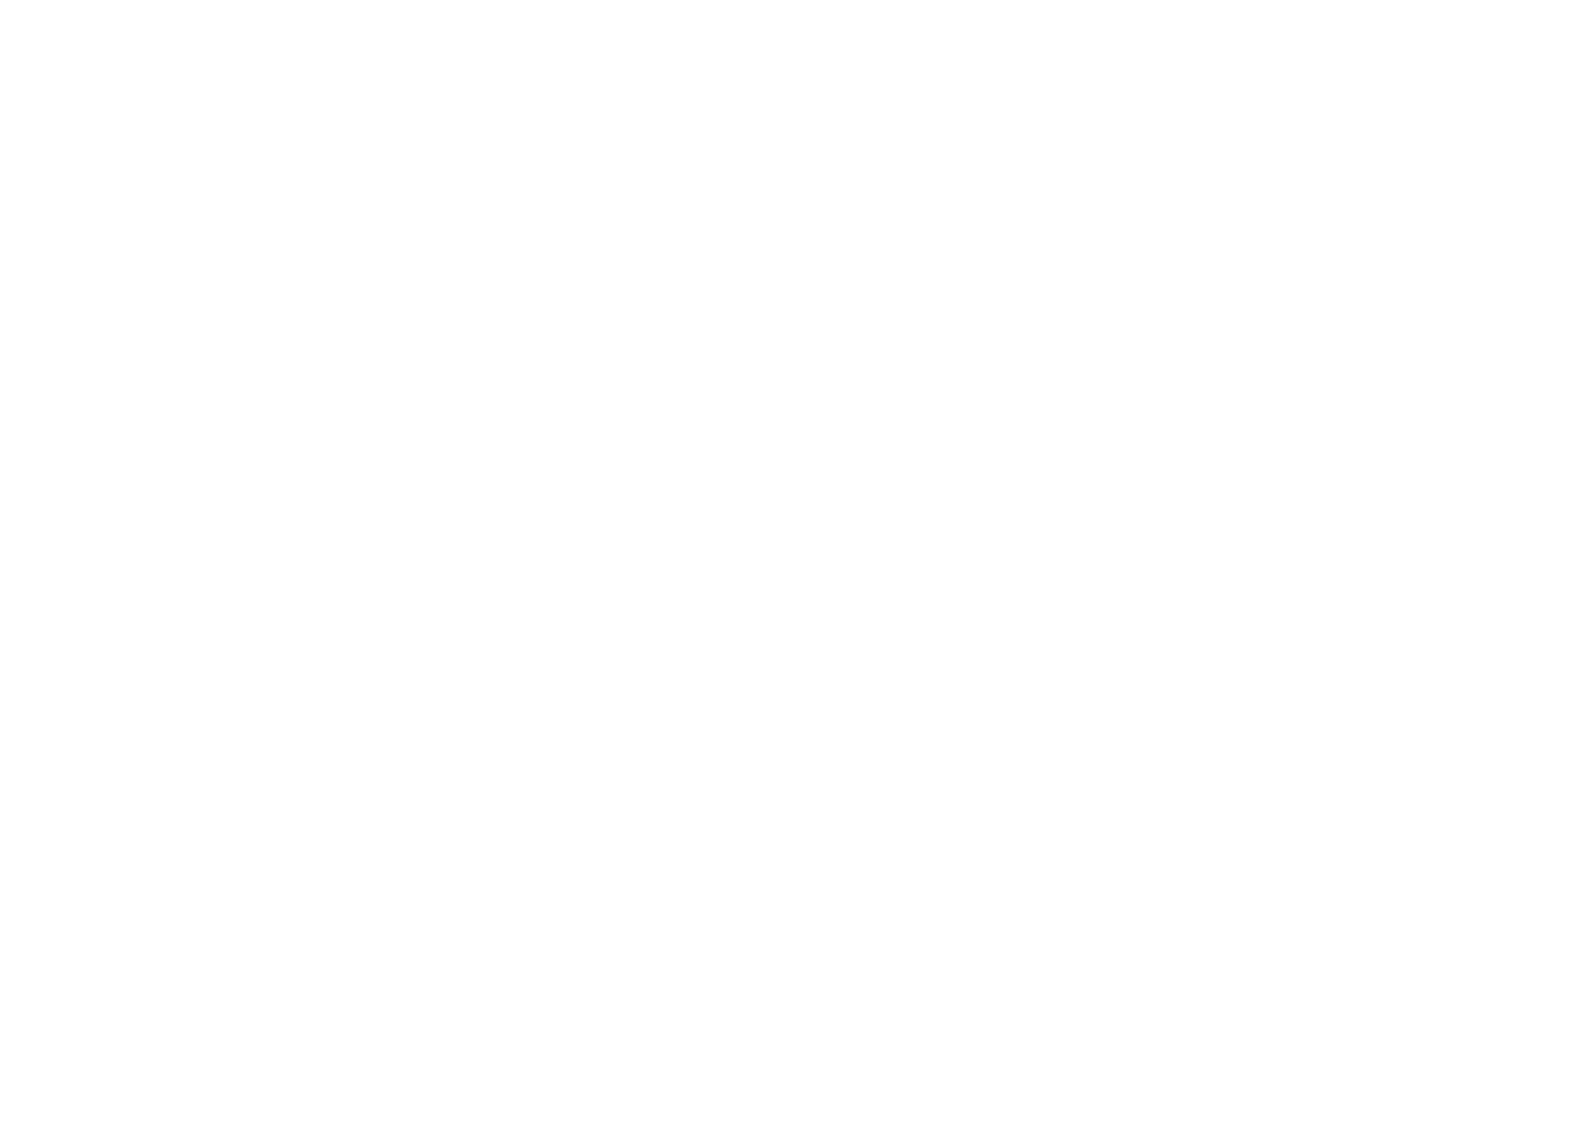 NABCO Industrial Supply